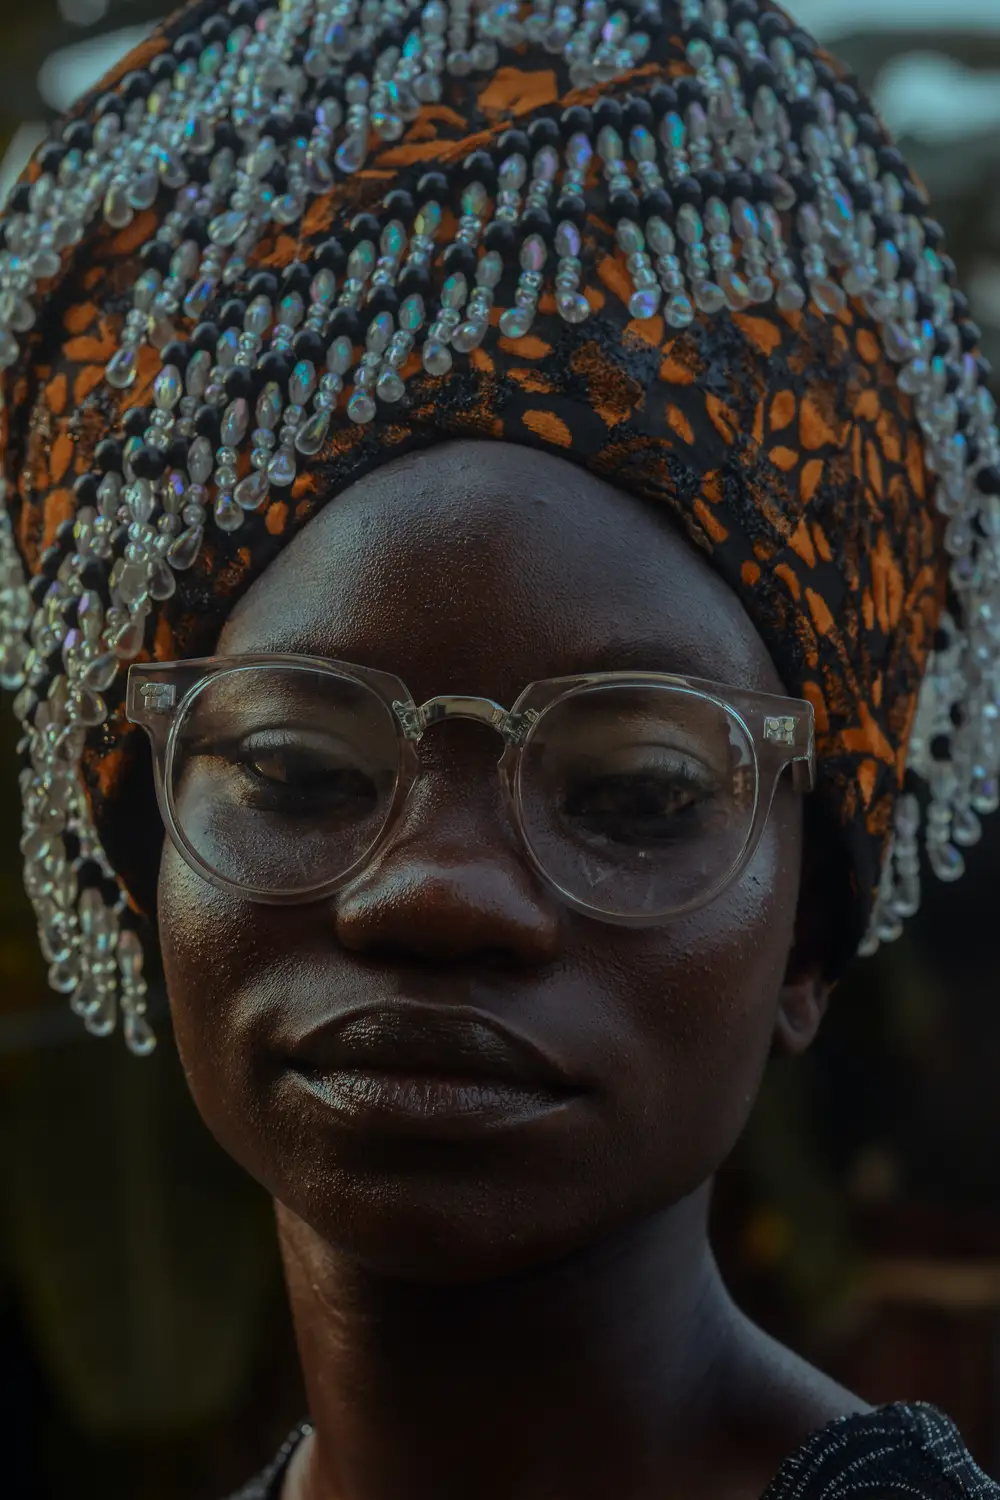 Woman wearing glasses and a beaded headscarf